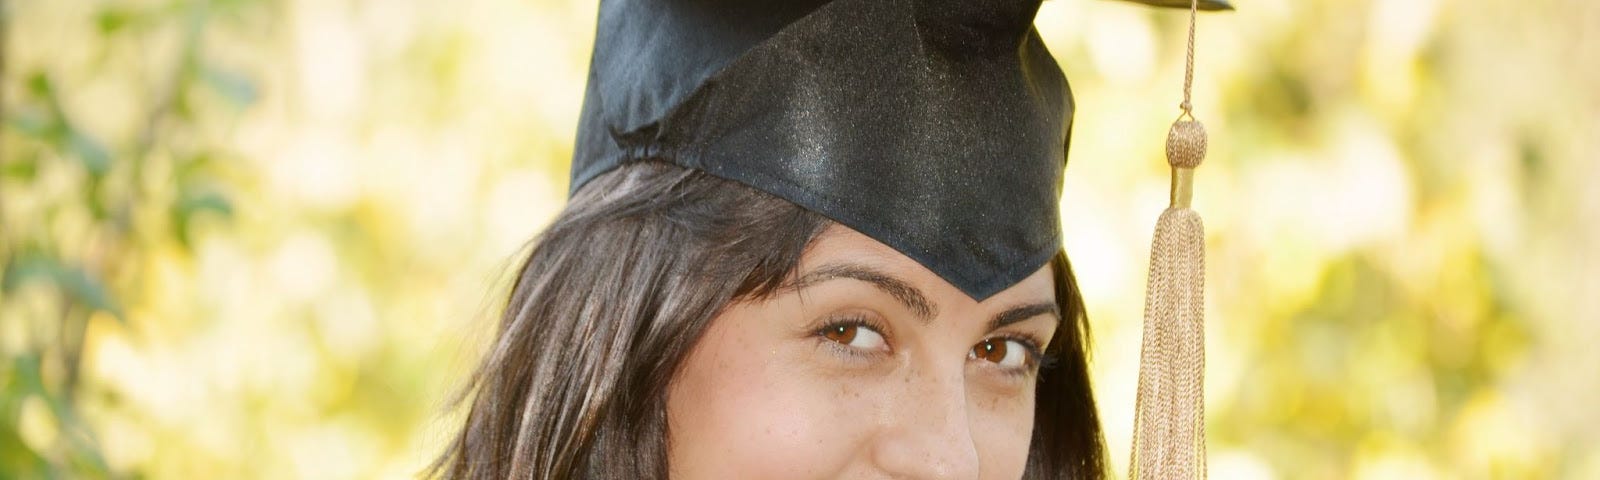 Head shot of female in cap and gown, smiling shyly.